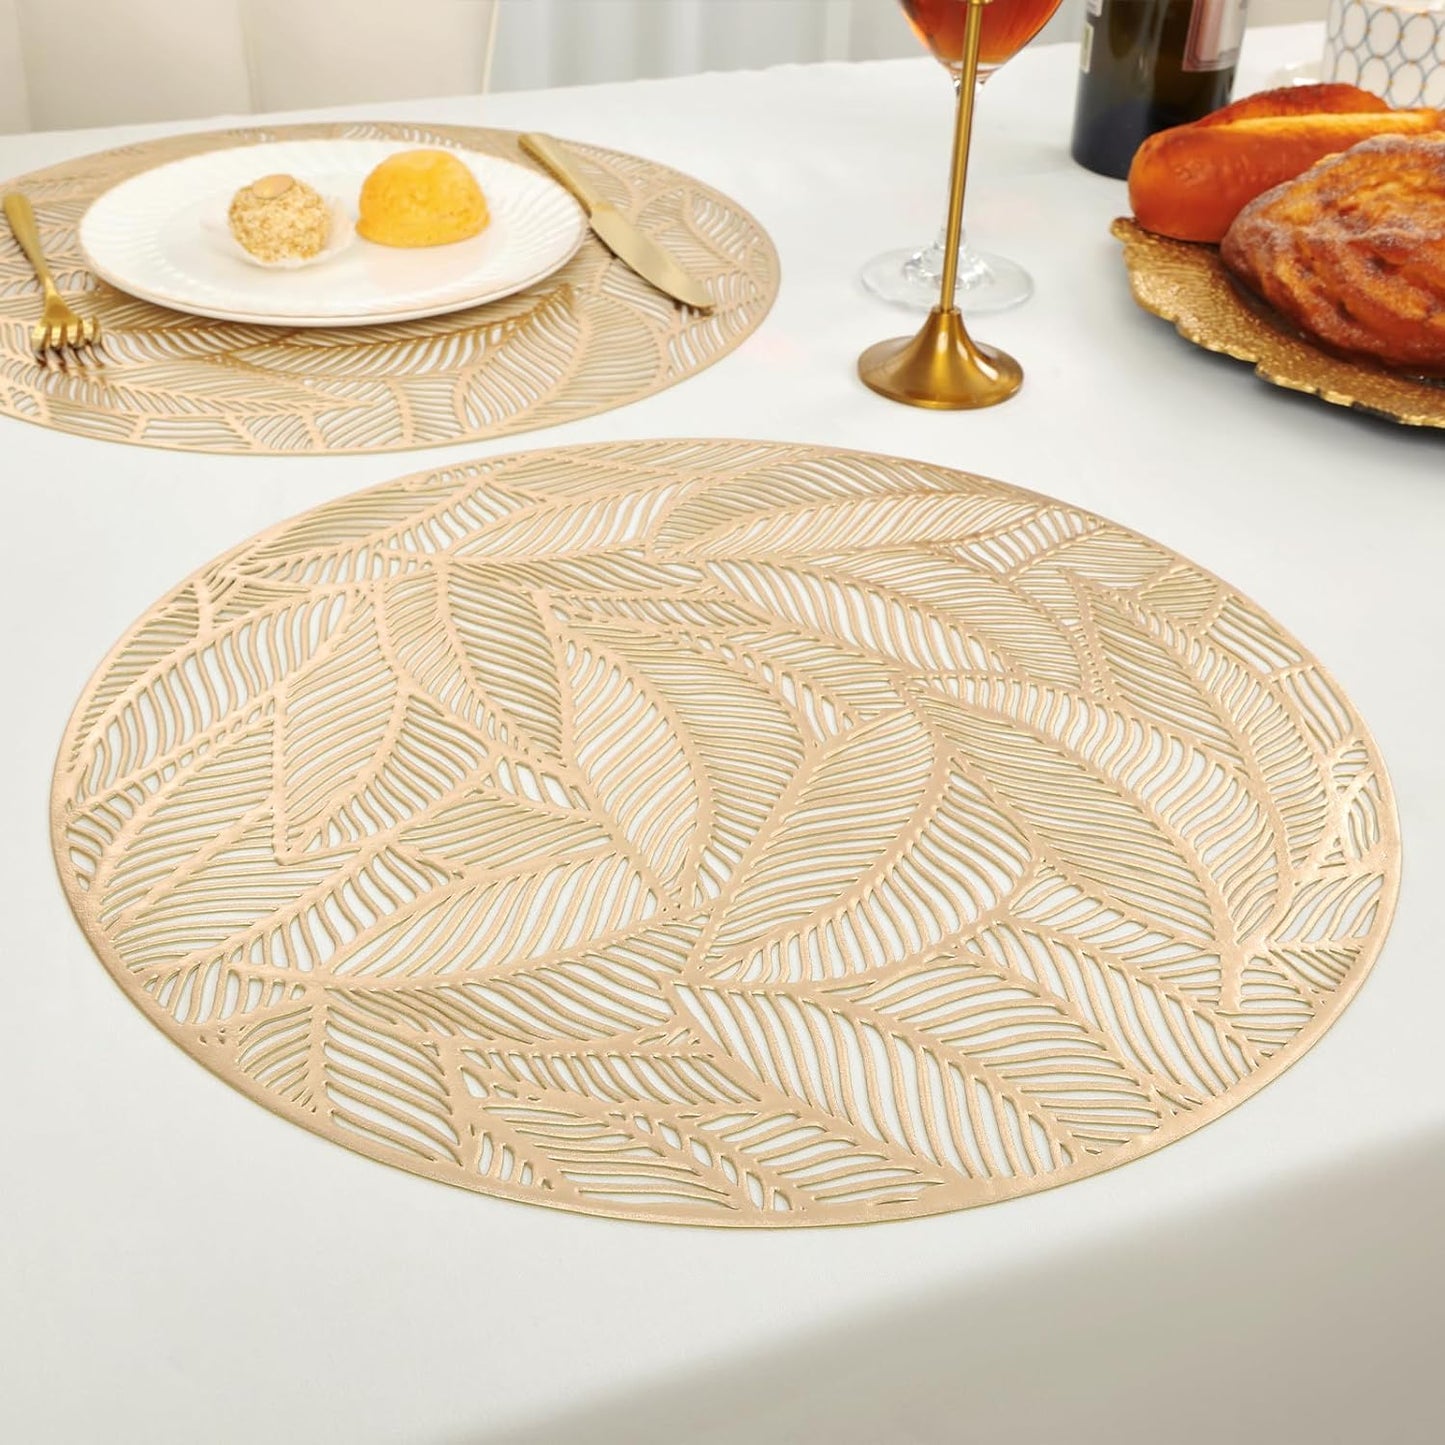 12 Pack Round Pressed Vinyl Placemats Metallic Place Mat Laminated Leaf Placemats Non-Slip Heat Insulation Kitchen Washable Table Mats Decoration Gold